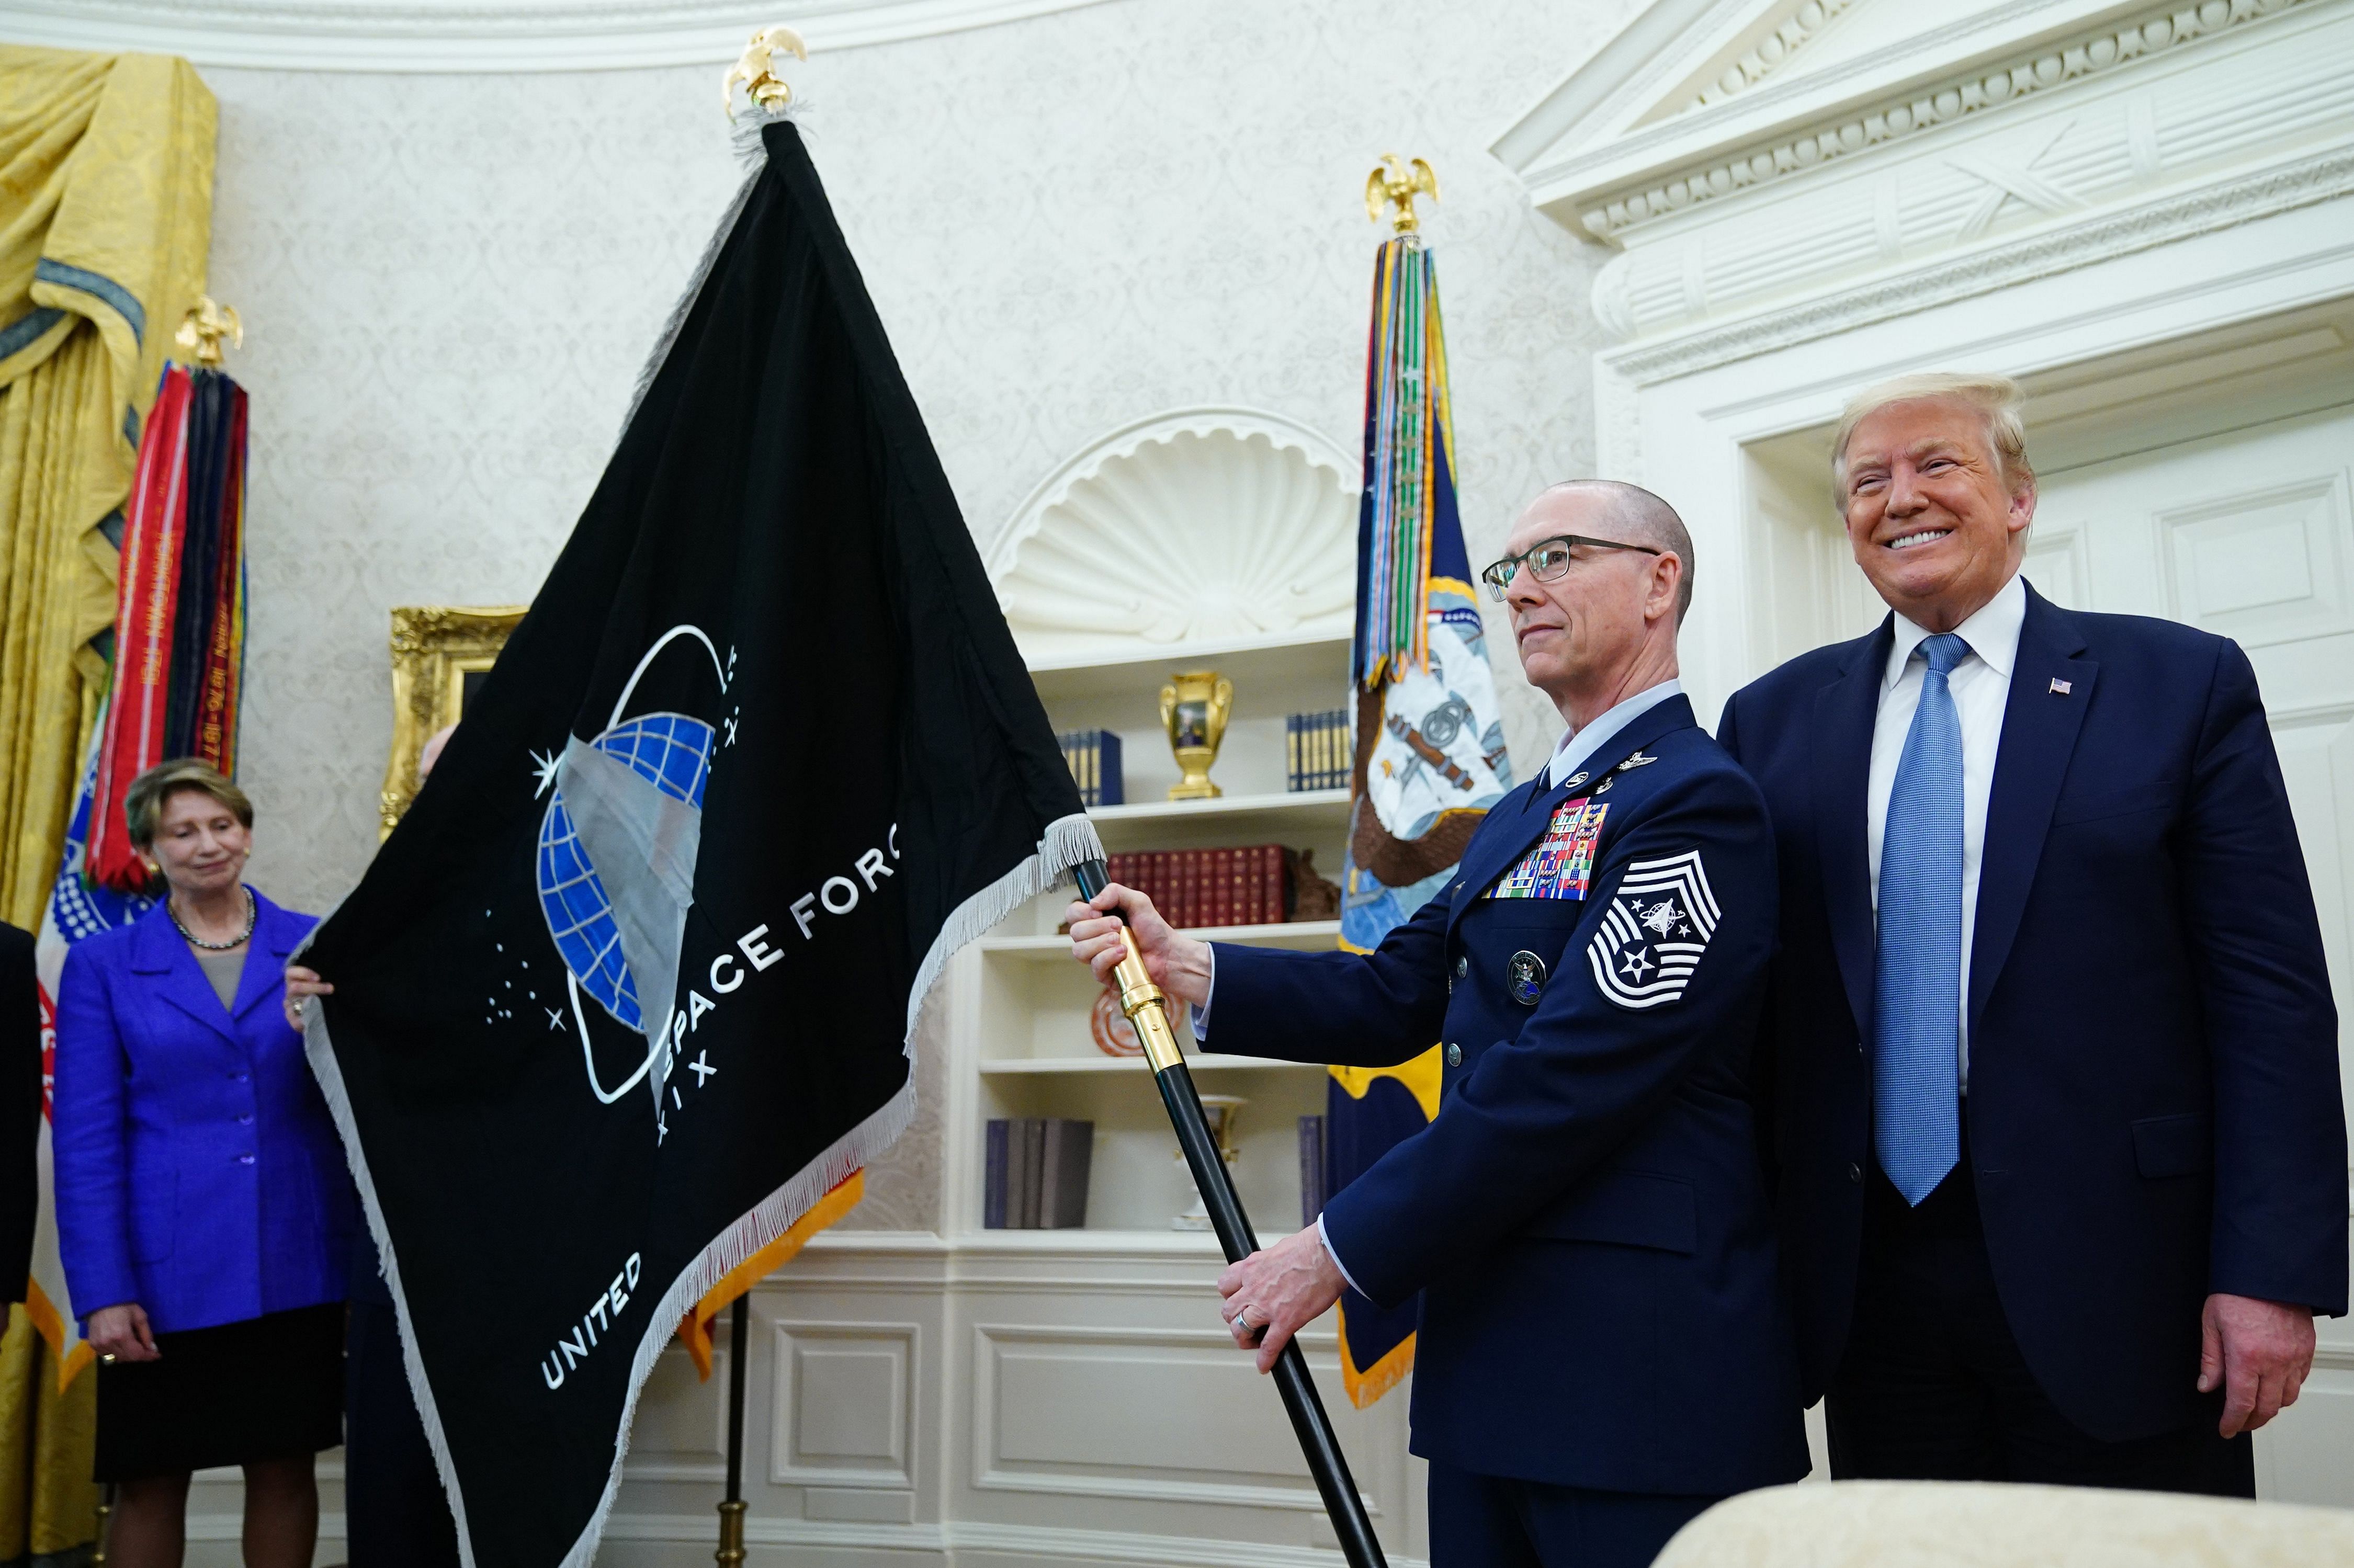 US Space Force Senior Enlisted Advisor CMSgt Roger Towberman, with US President Donald Trump, presents the US Space Force Flag in the Oval Office of the White House. Credit: AFP Photo